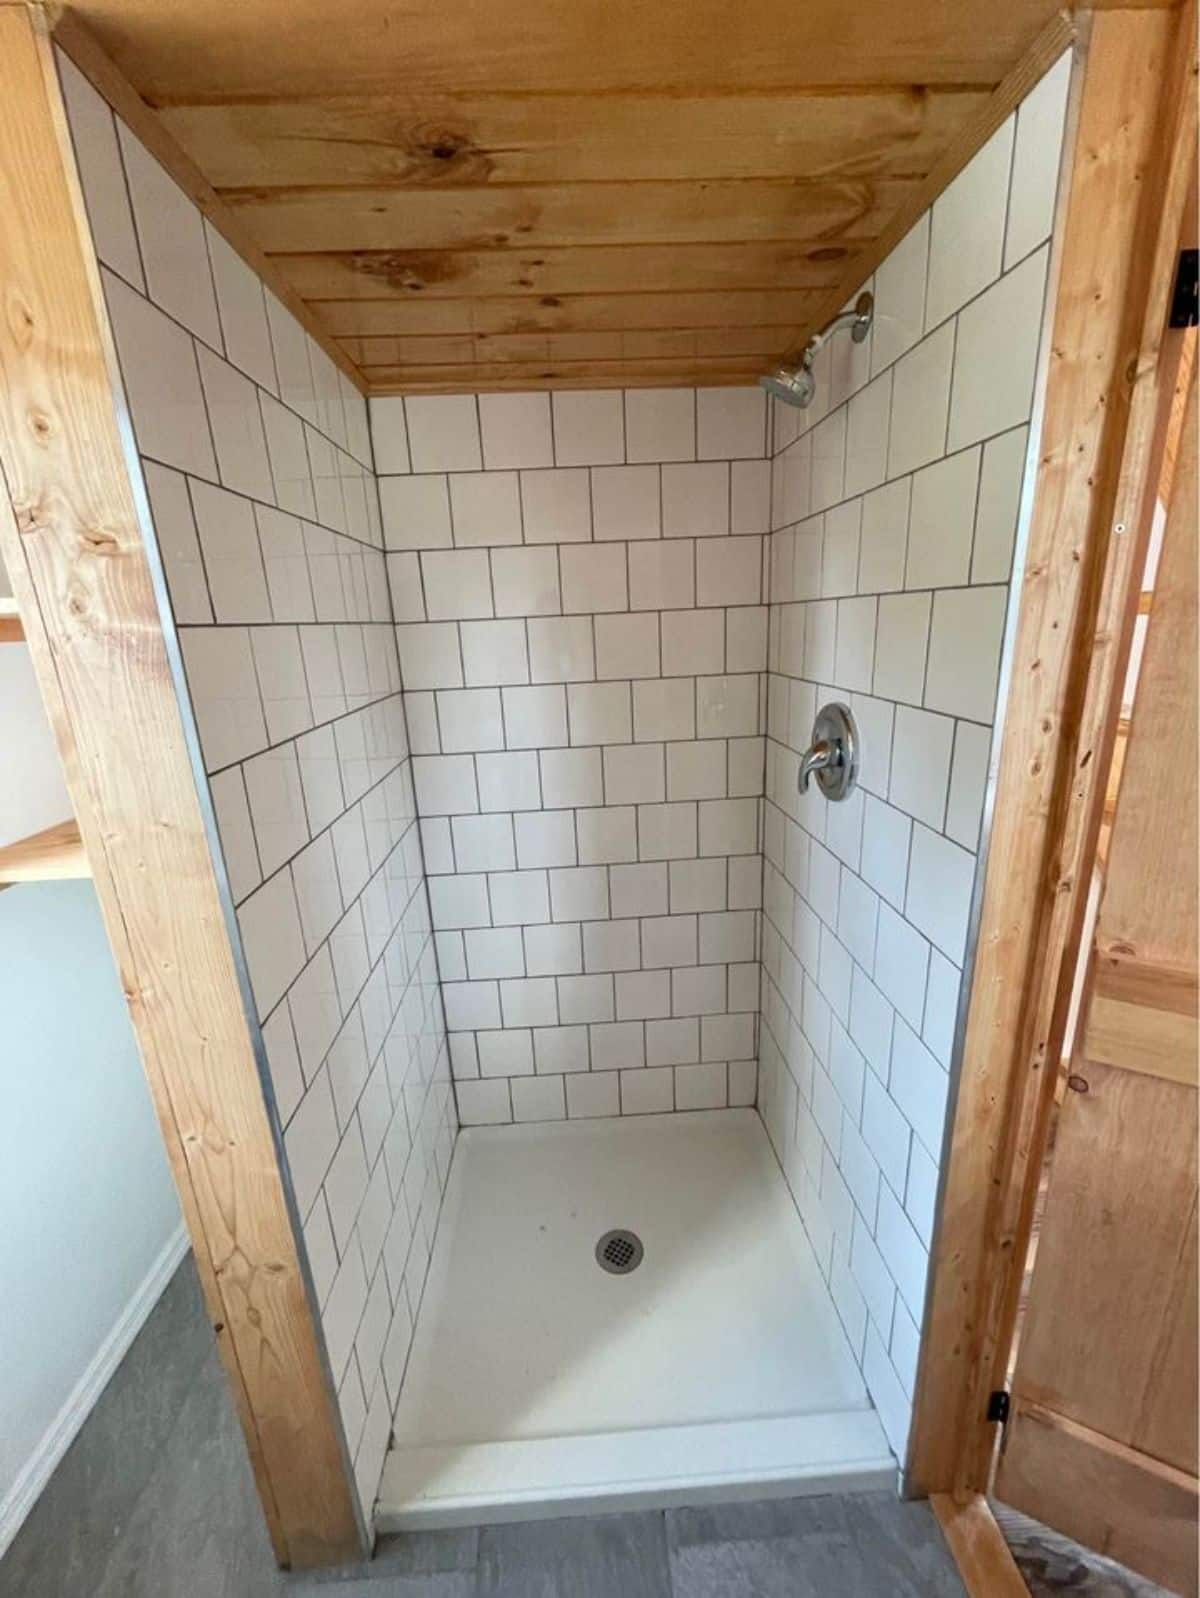 Seperate shower area in bathroom of 20' Towable Tiny Home